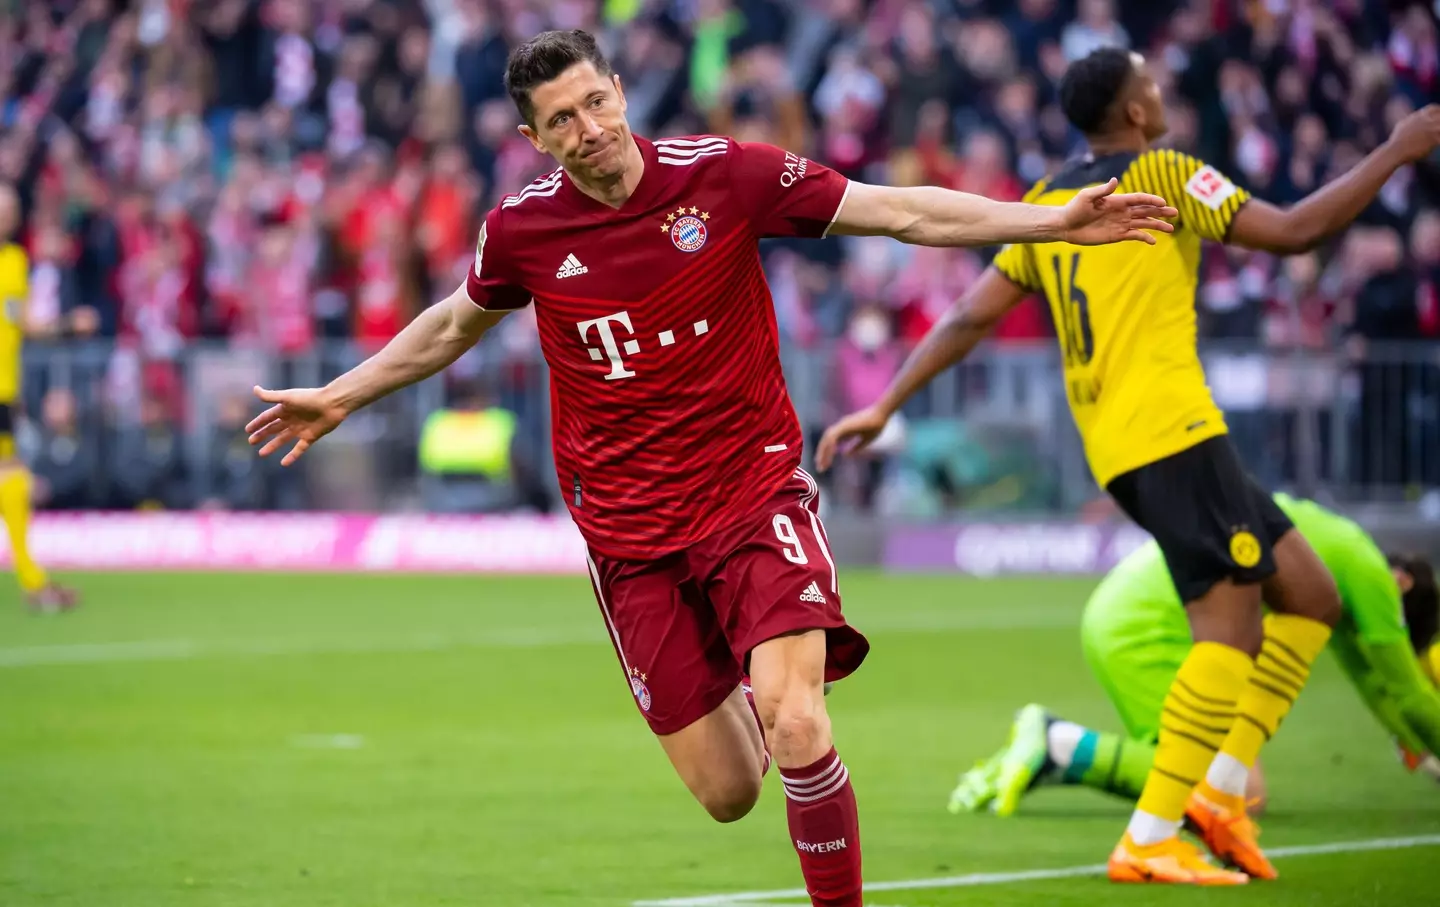 Lewandowski could be in the top 10 on his own. Image: PA Images